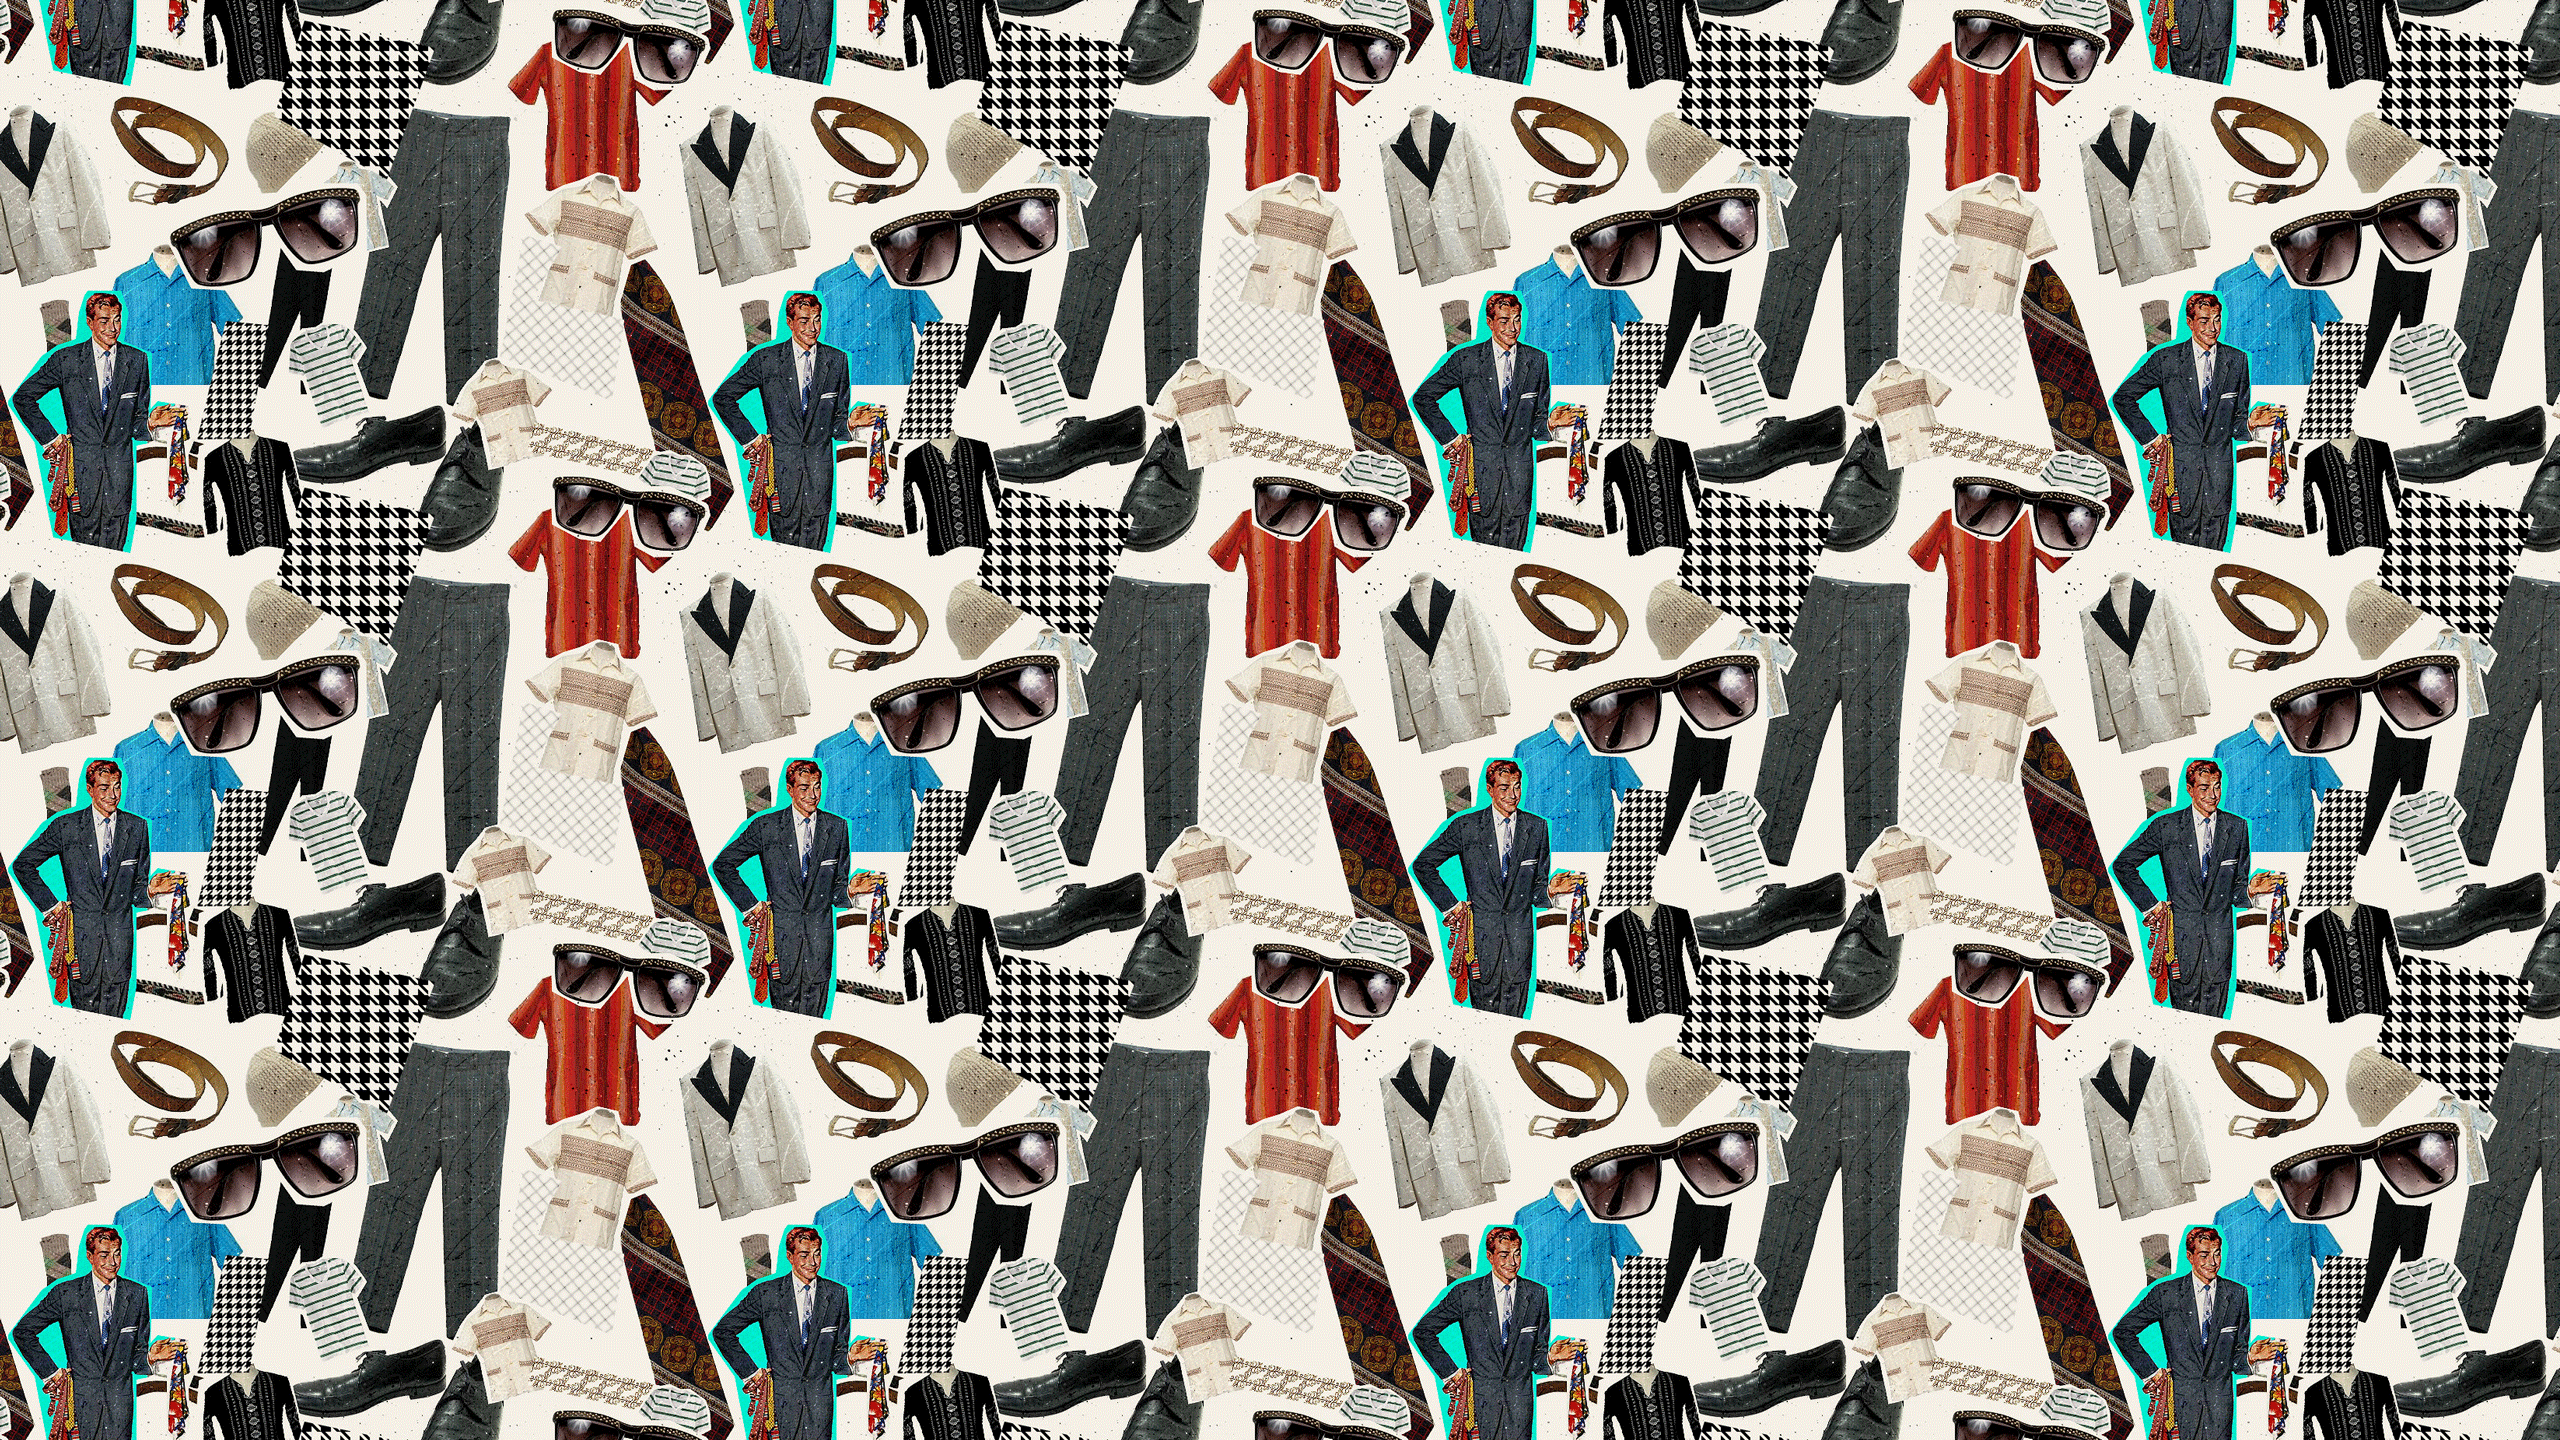 The Vintage Fashion Desktop Wallpaper is easy Just save the wallpaper